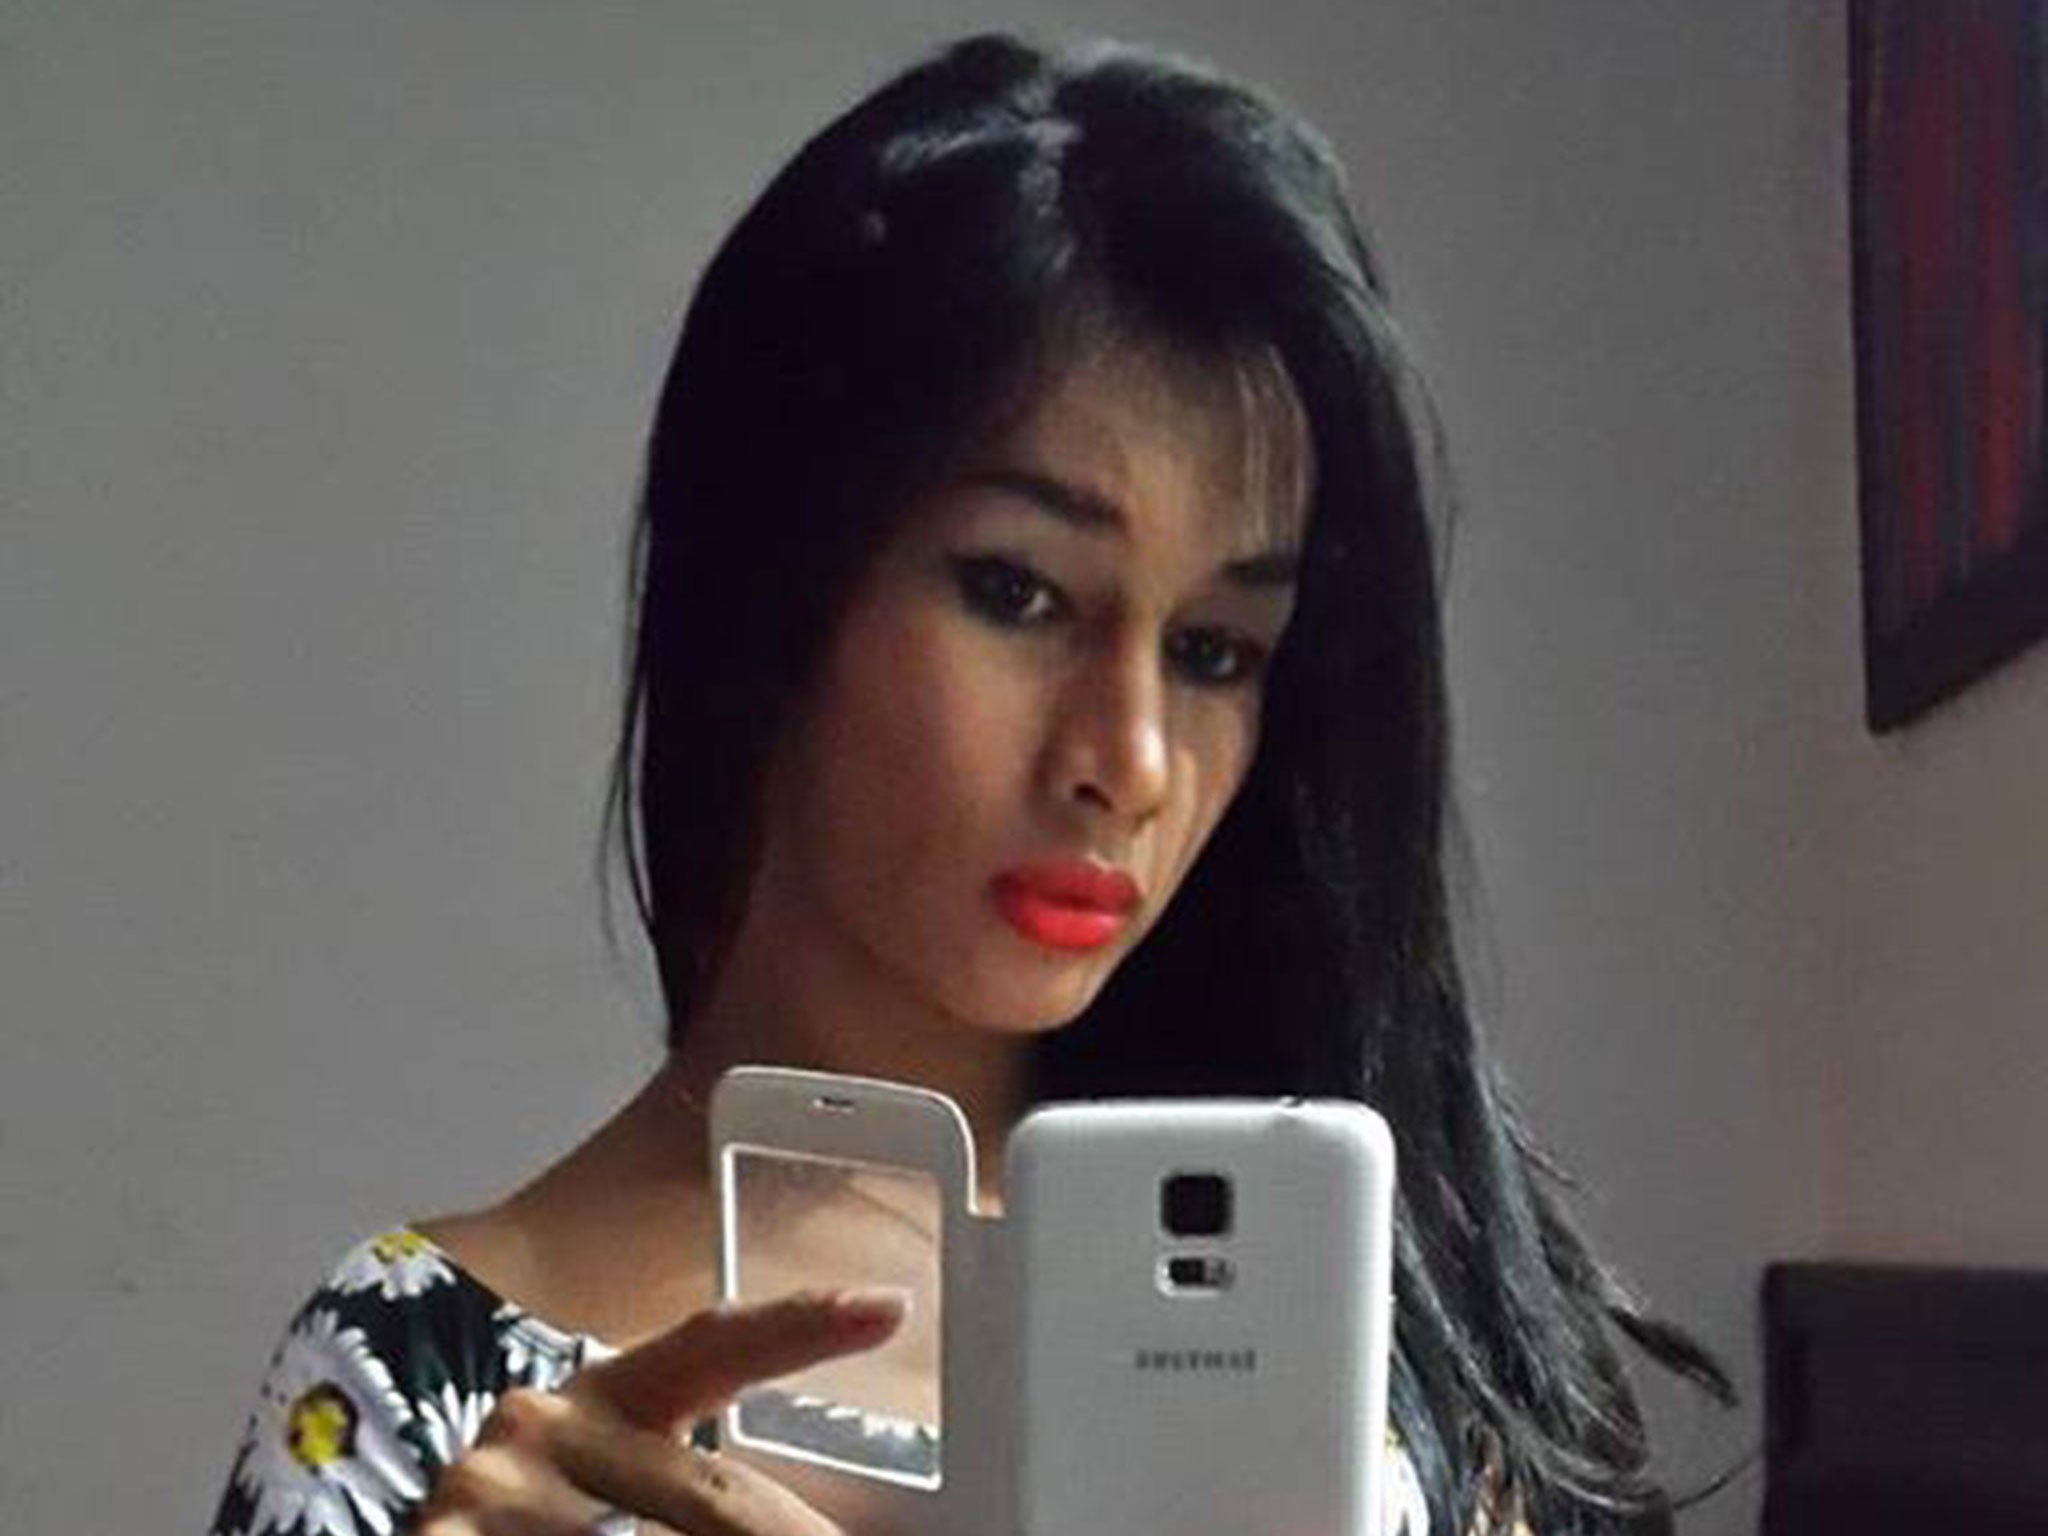 Mayang Prasetyo was found dead at the apartment she shared with her boyfriend